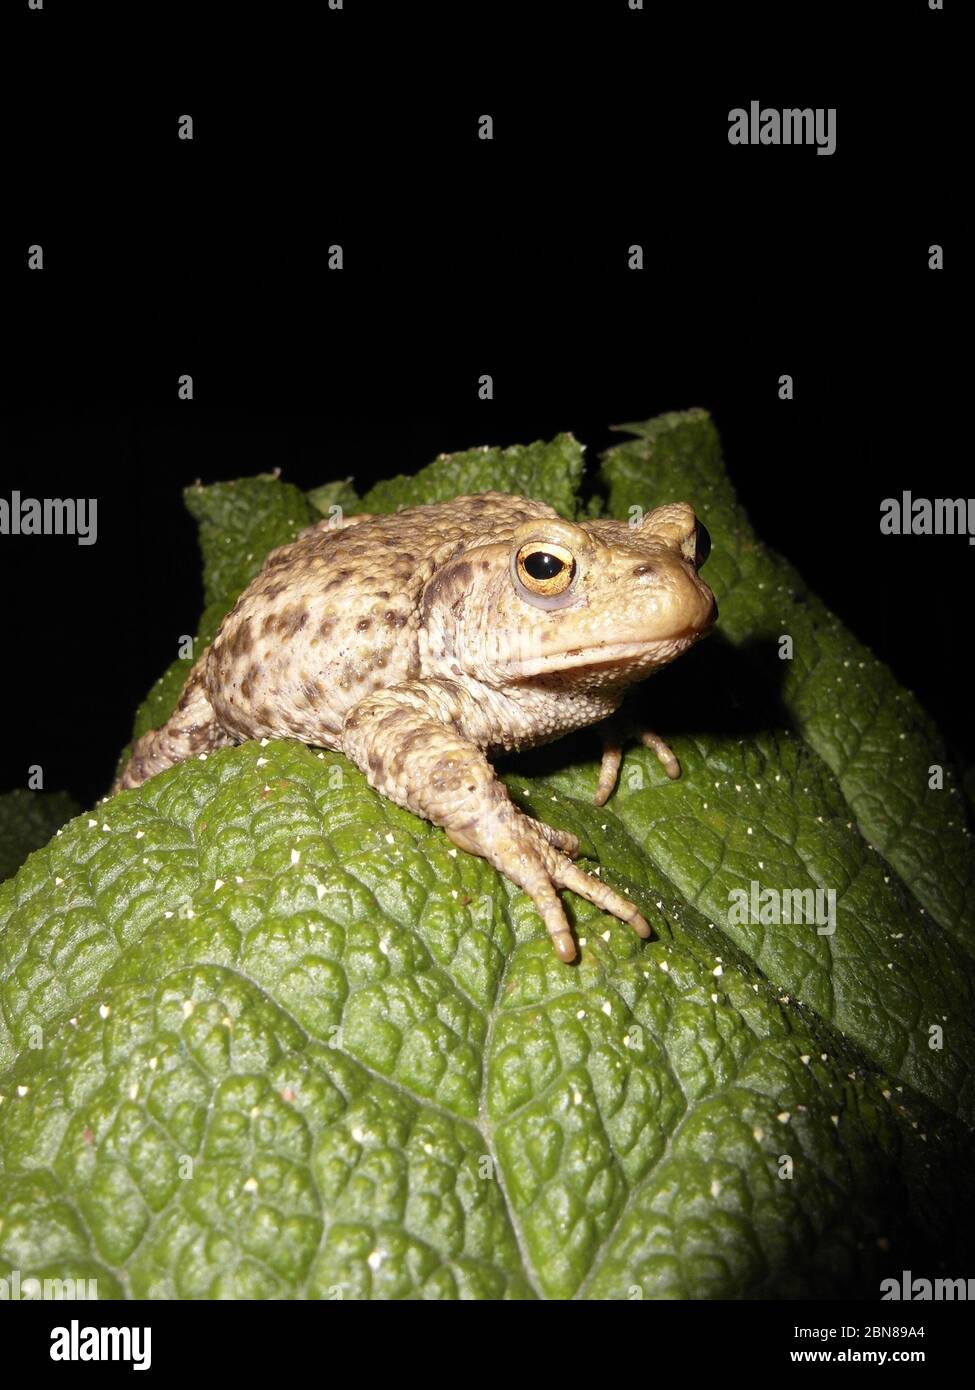 TOAD. TOADS. TOAD SITTING ON ALARGE LEAF OF A GUNNERA PLANT. AMPHIBIAN. IMAGE TAKEN AT NIGHT IN GARDEN IN THE LONDON BOROUGH OF BARKING AND DAGENHAM. THE BARKING TOAD. THE GUNNERA PLANT IS NATIVE TO SOUTH AMERICA. BLACK BACKGROUND. NIGHT PHOTOGRAPHY. NATURE. CONSERVATION. WILDLIFE ON THE DOOR STEP. BRITISH WILDLIFE. Stock Photo